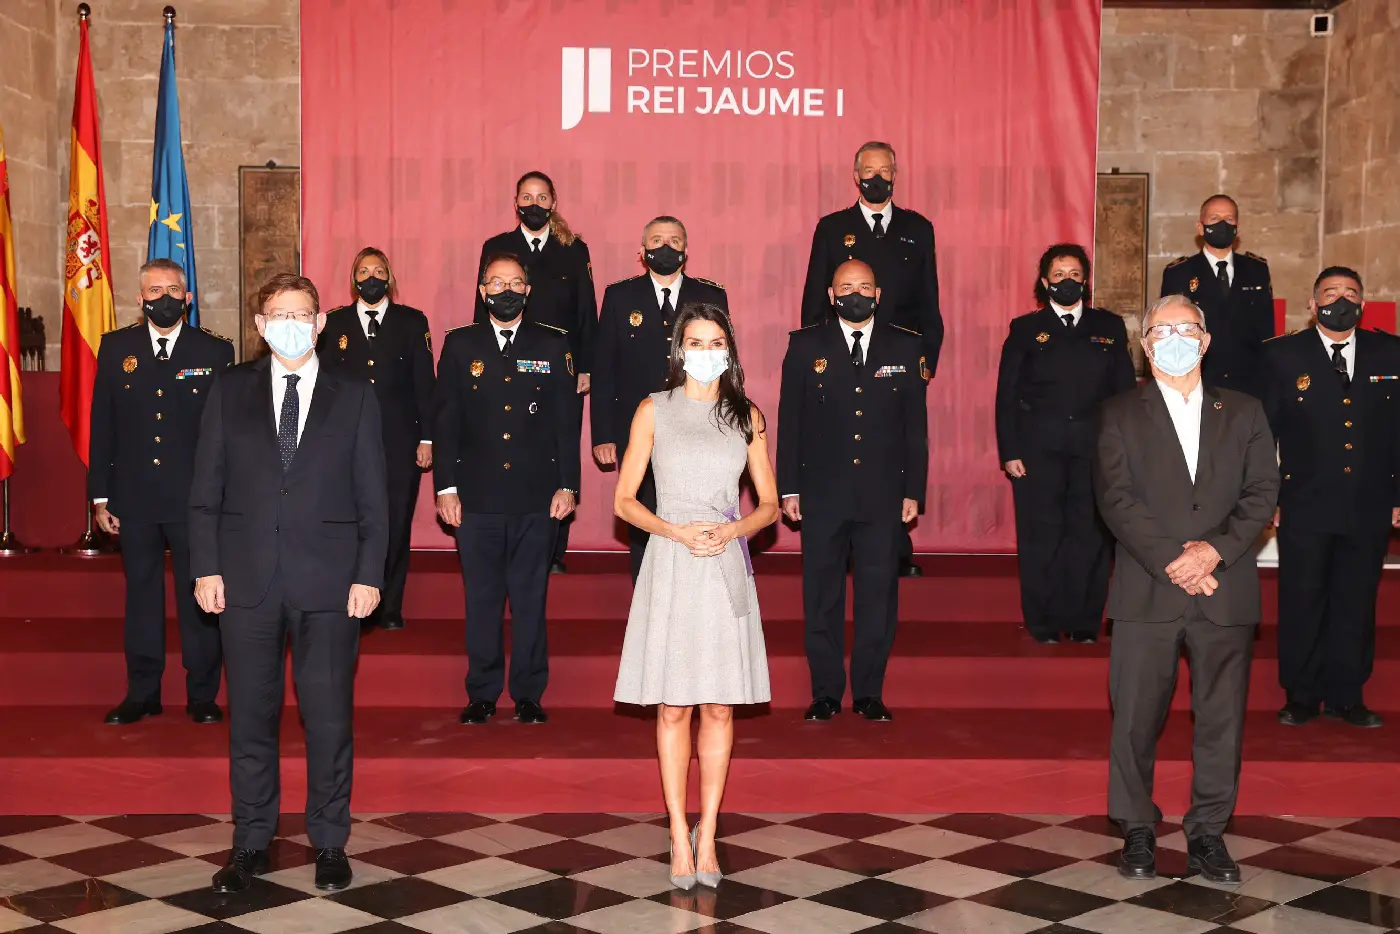 Queen Letizia with the representation of the Local Police of Valencia attending the hearing